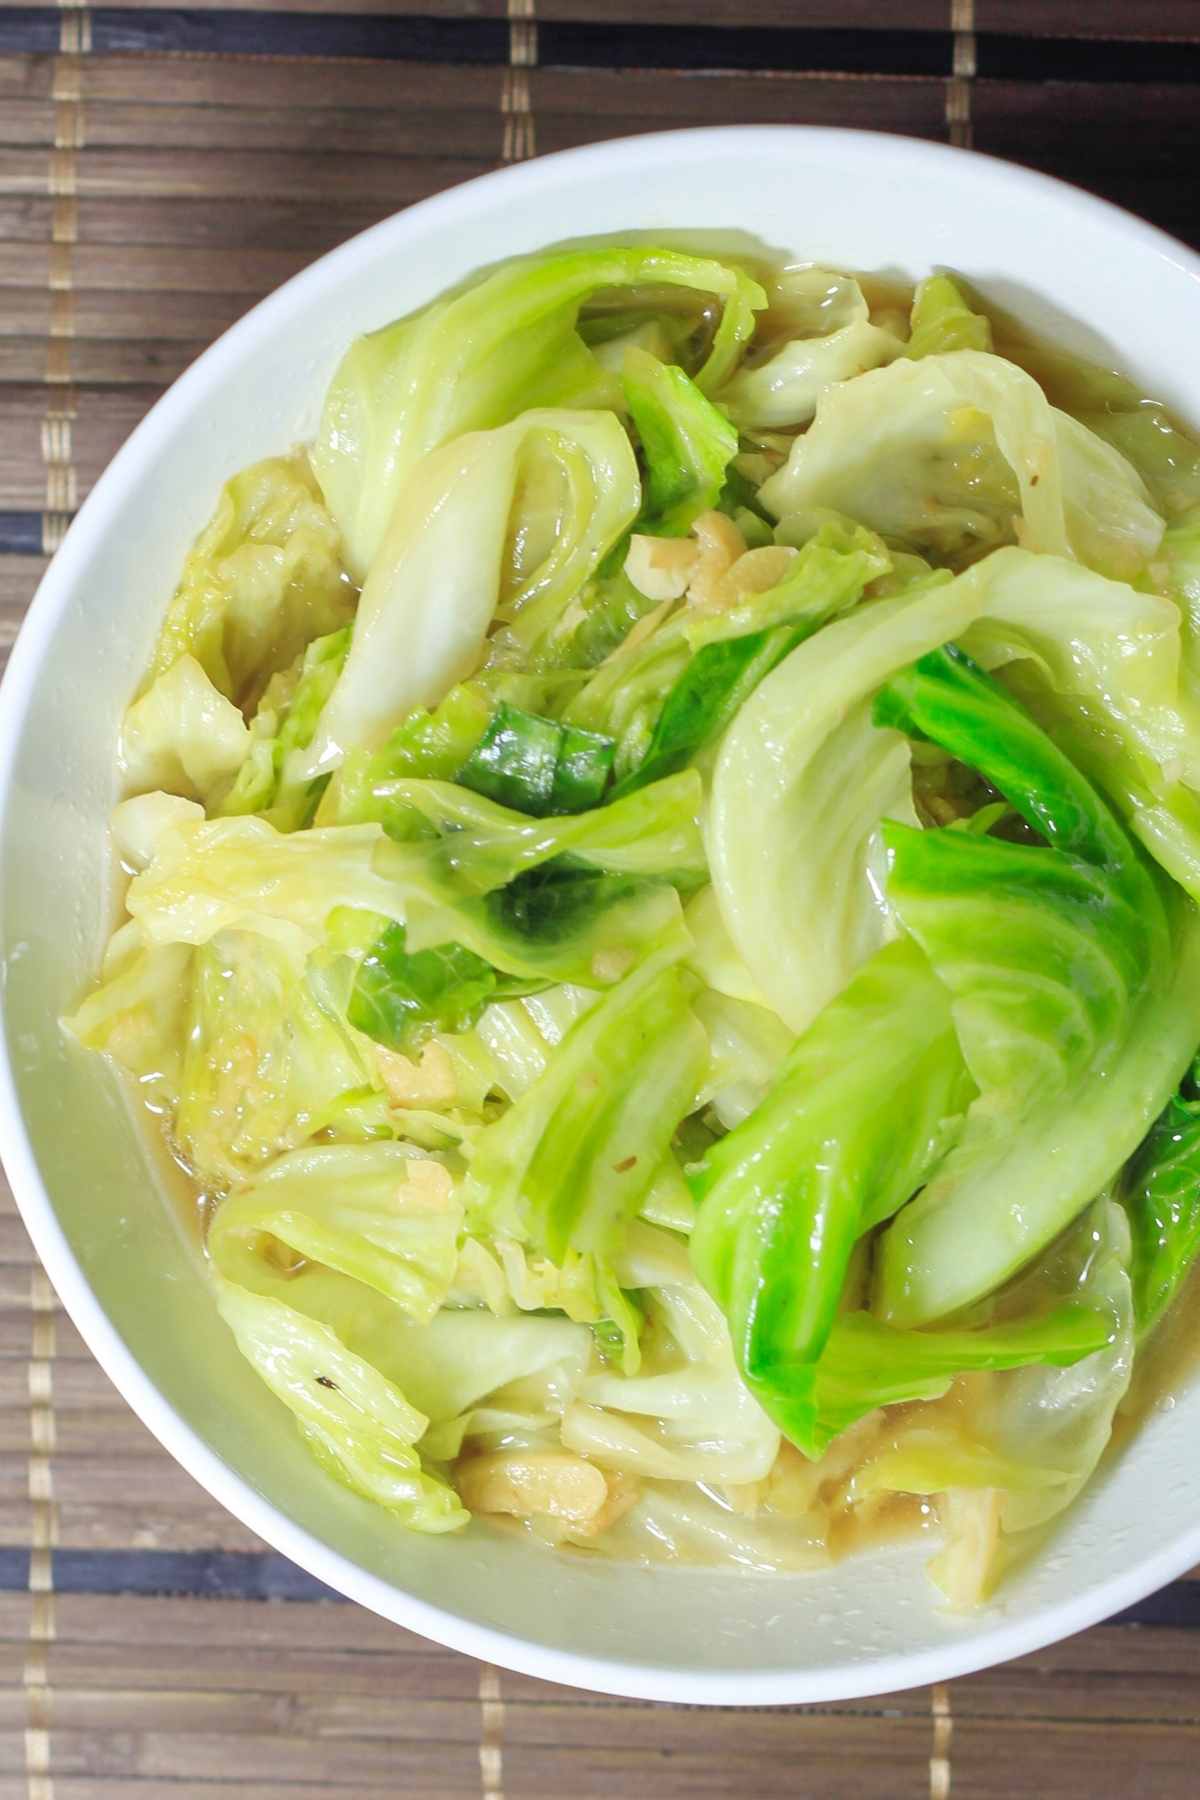 This Chinese Cabbage Stir Fry is crunchy, flavorful, and so easy to make! Enjoy it as a side dish, add it to soups or noodles for a complete meal.